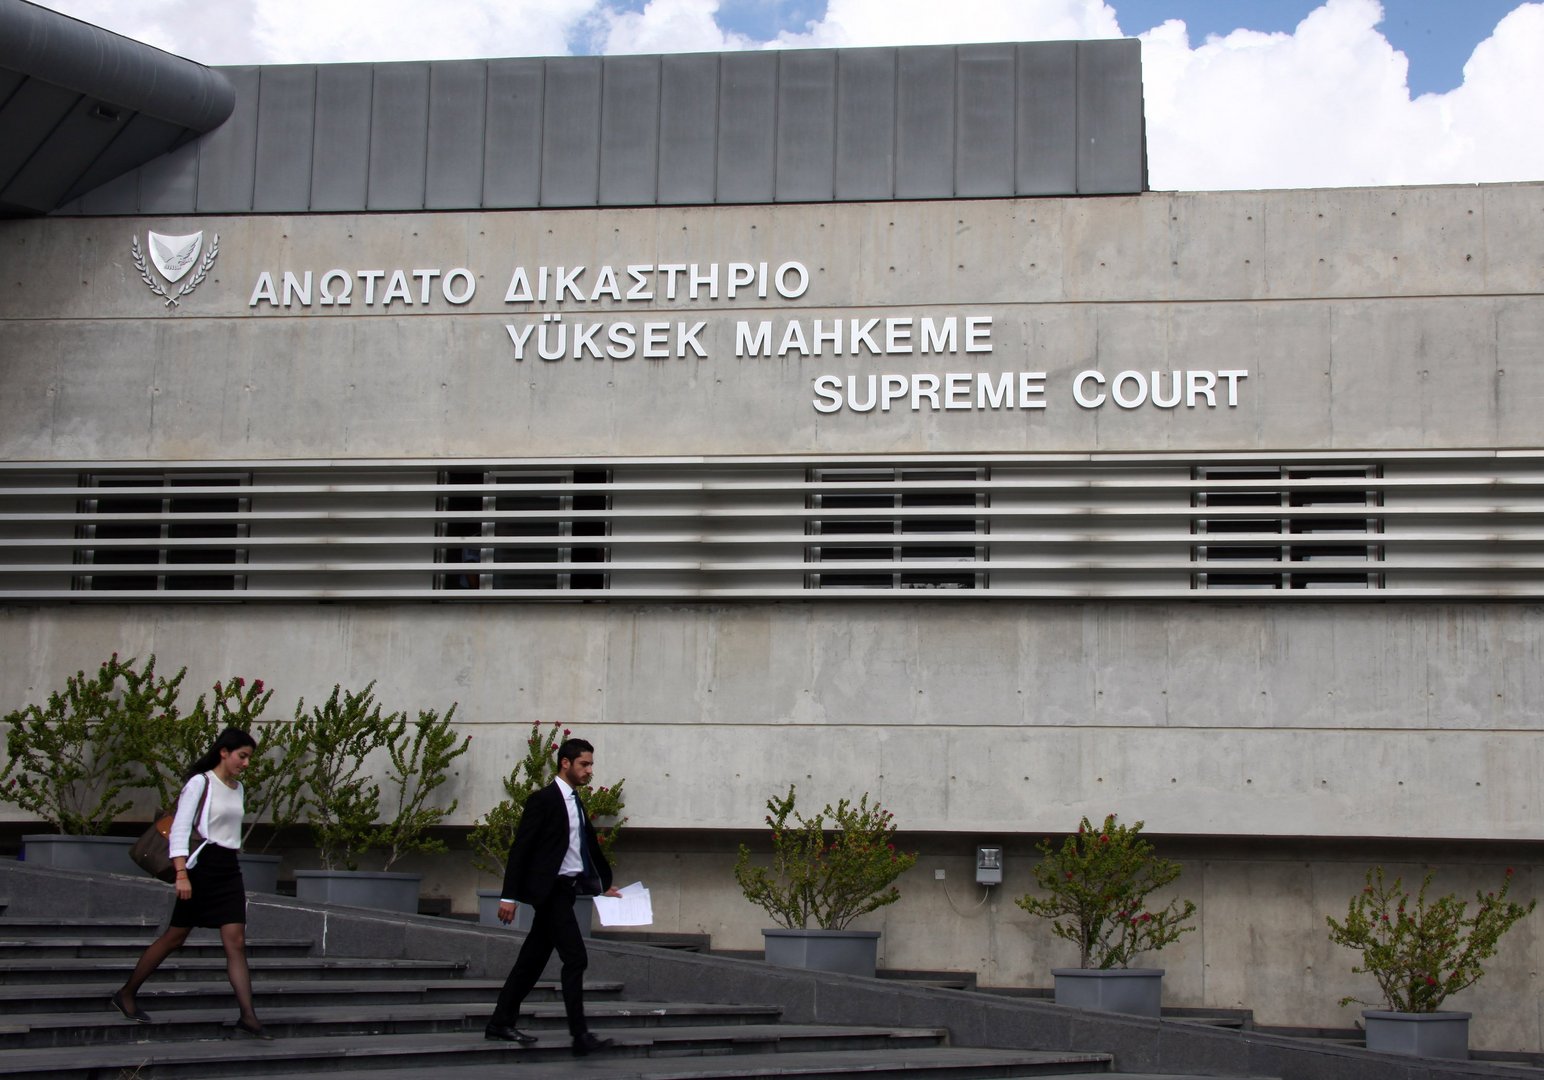 Cyprus implemented GRECO recommendations for judges, not MPs or prosecutors